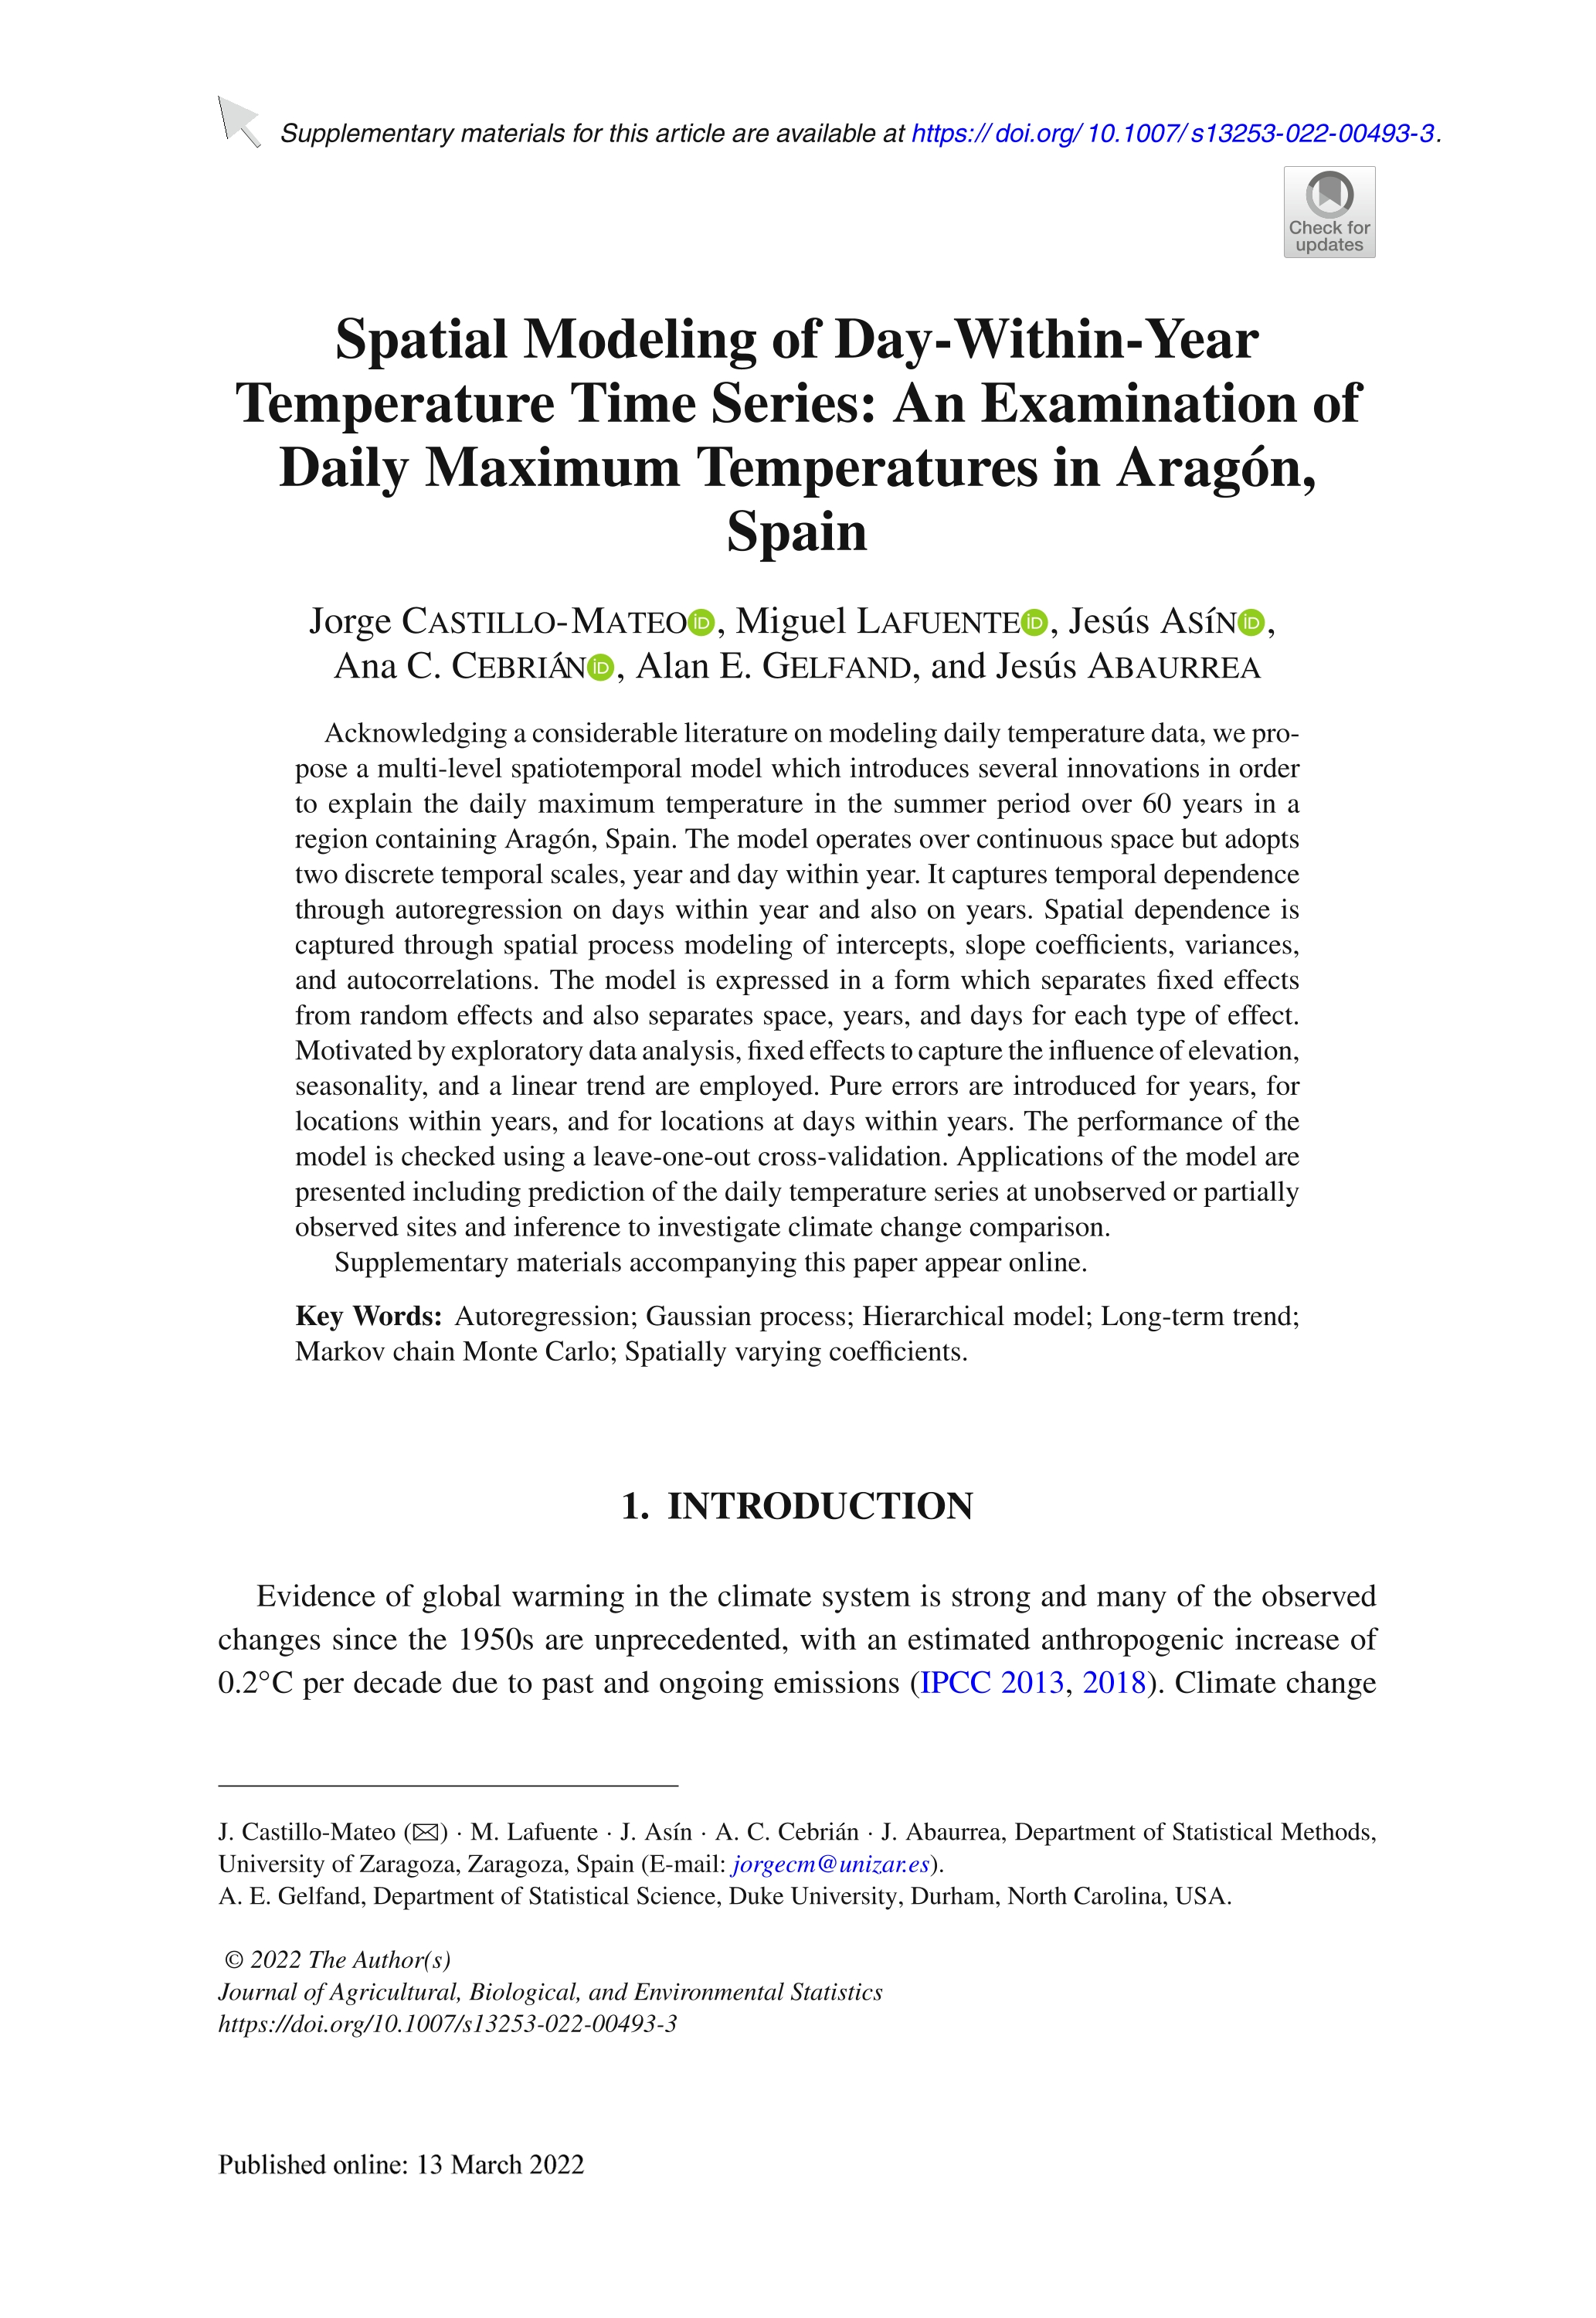 Spatial modeling of day-within-year temperature time series: an examination of daily maximum temperatures in Aragón, Spain